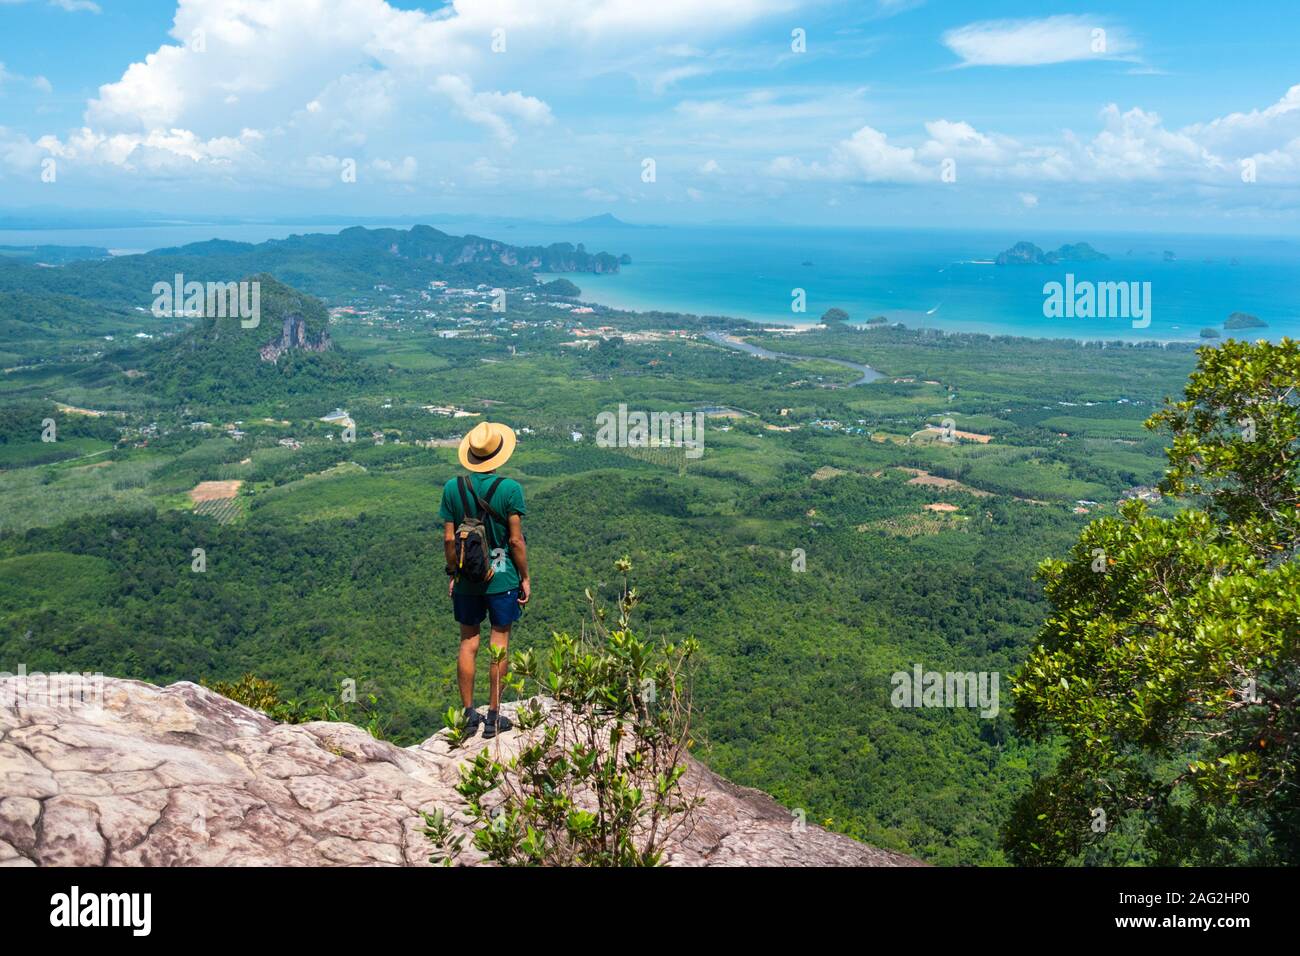 Traveler in hat stands on rock high in mountains landscape & sea on horizon. View of Ao Nang bay and islands from Dragon Crest at Khao Ngon Nak Trail Stock Photo